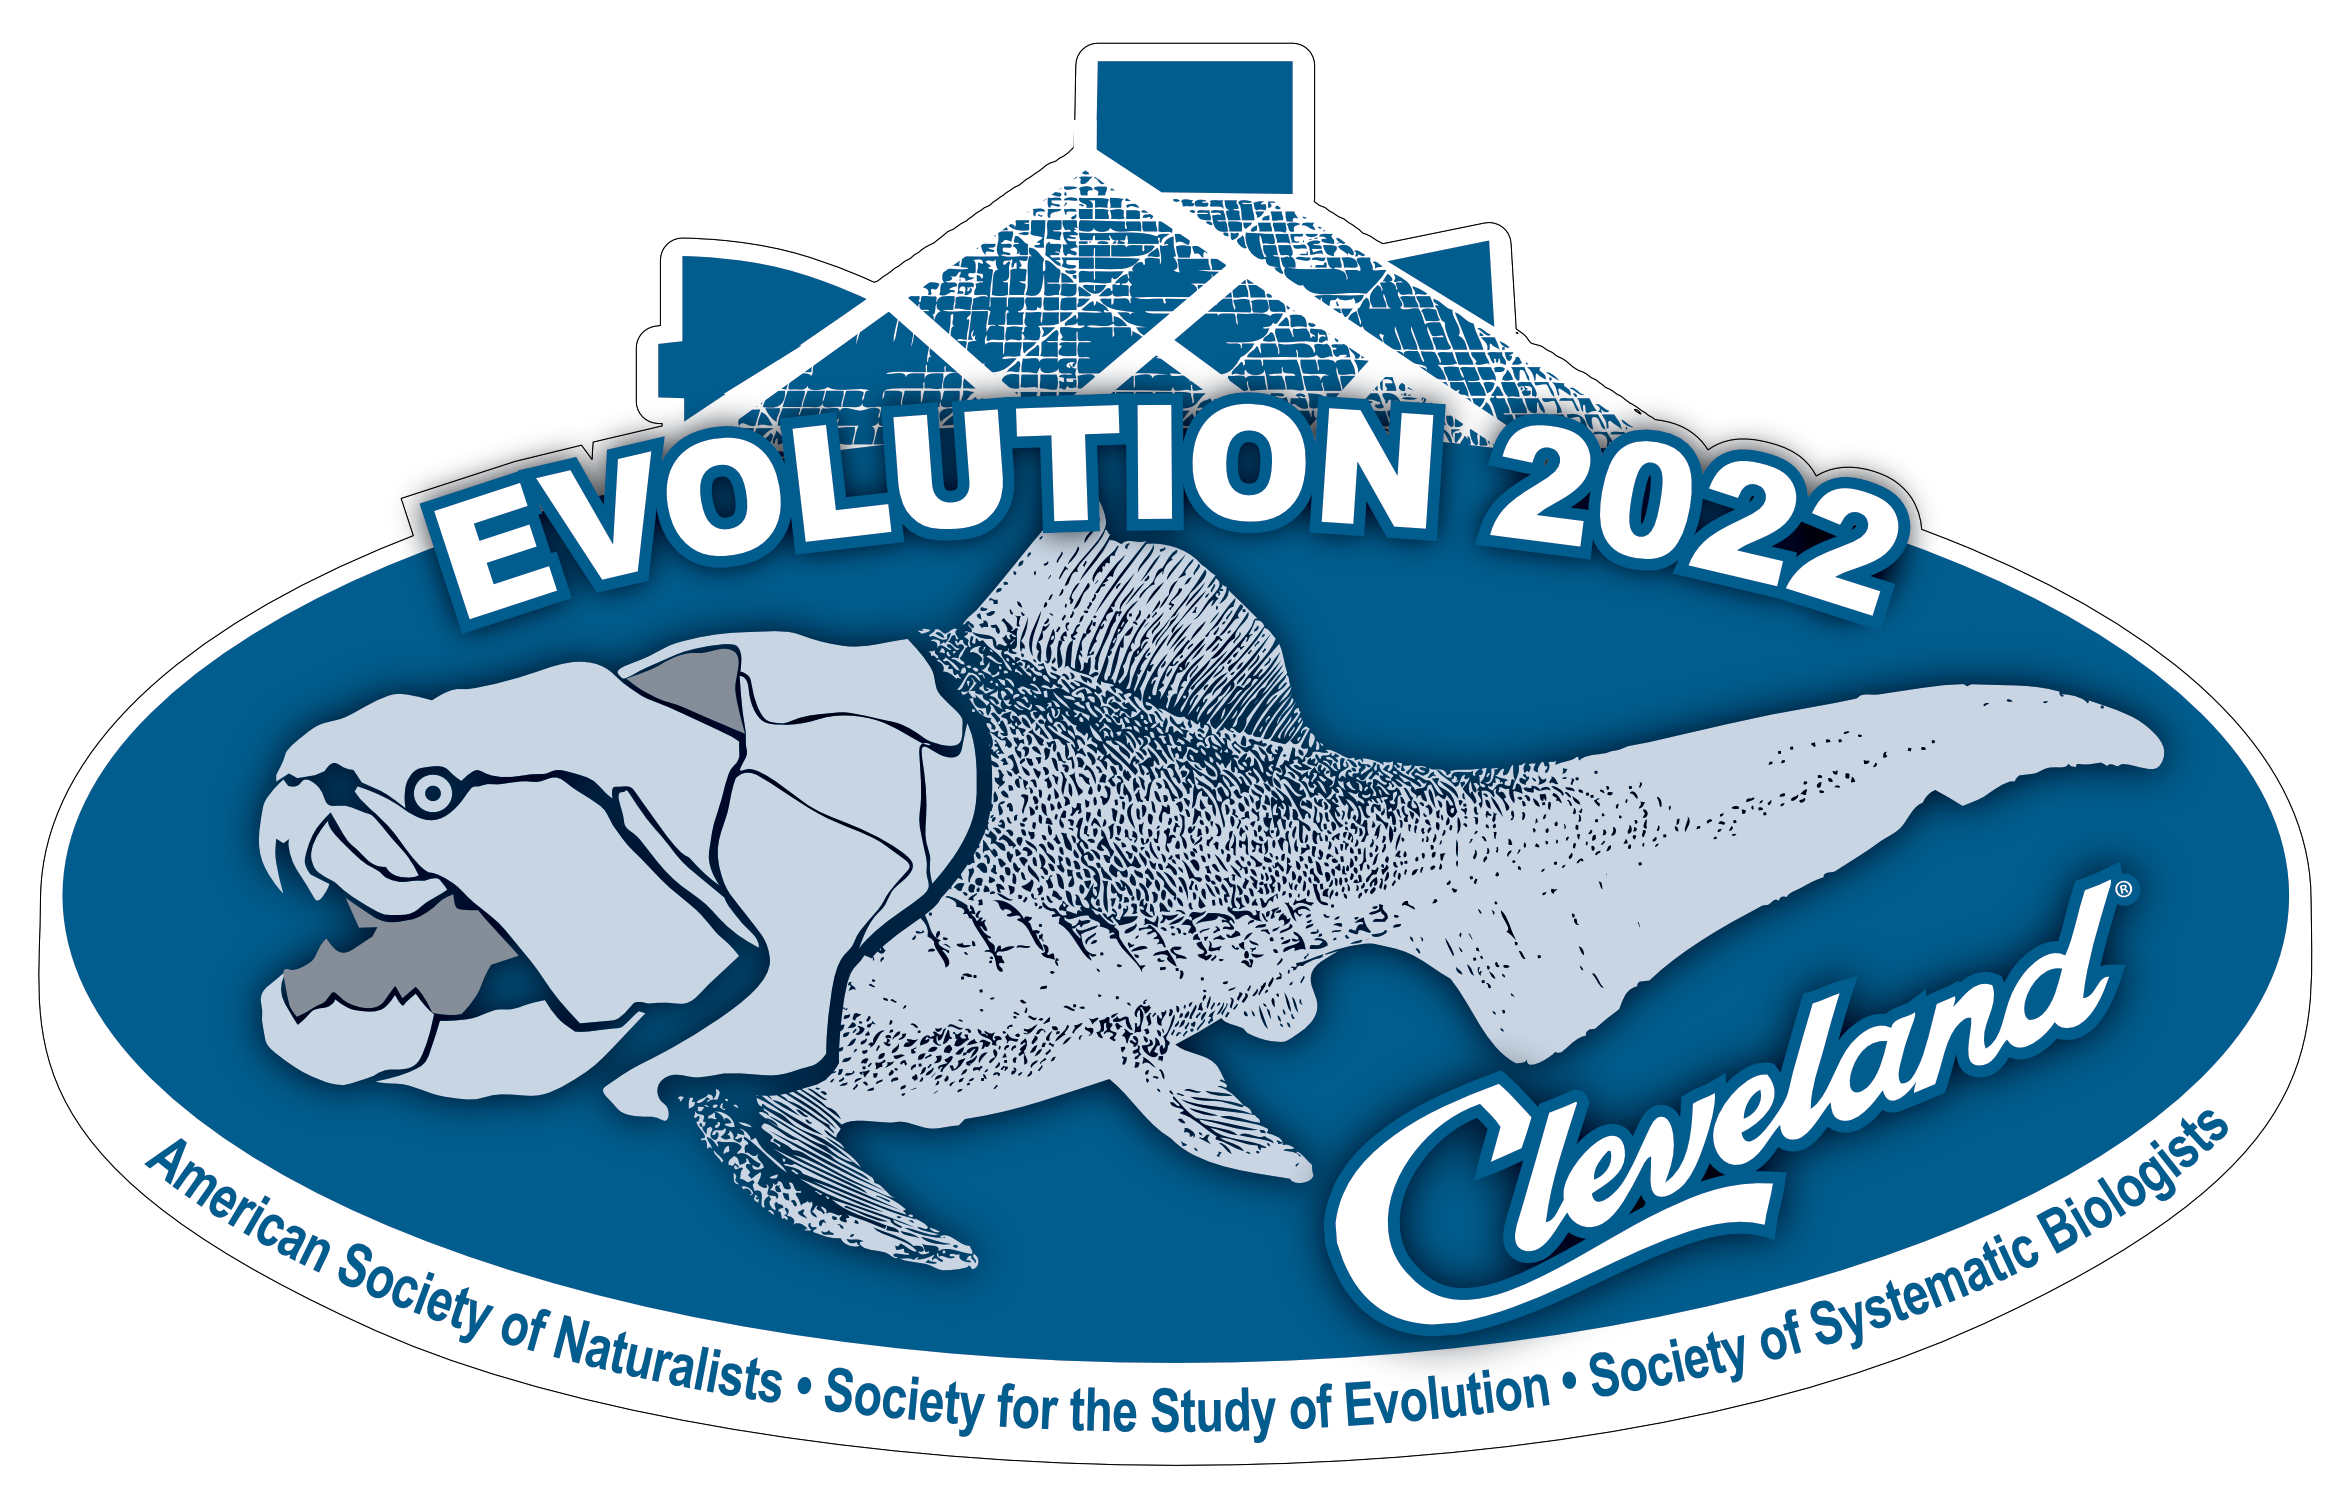 The Evolution 2022 logo, which is the words Evolution 2022 above a fish fossil and the word Cleveland in white and gray on a blue background.